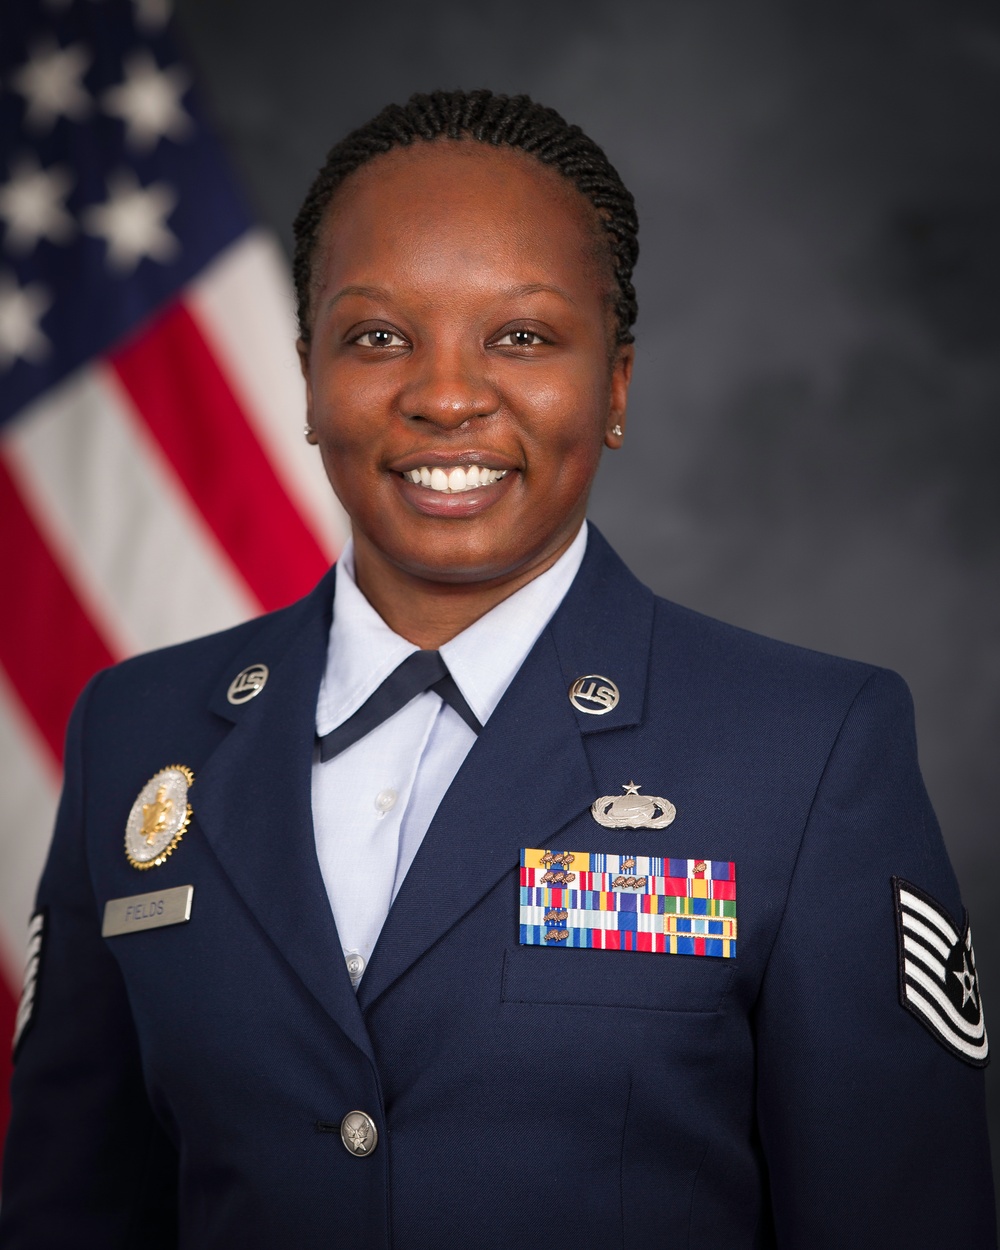 Official portrait of Technical Sgt. Sessanee L. Fields, US Air Force